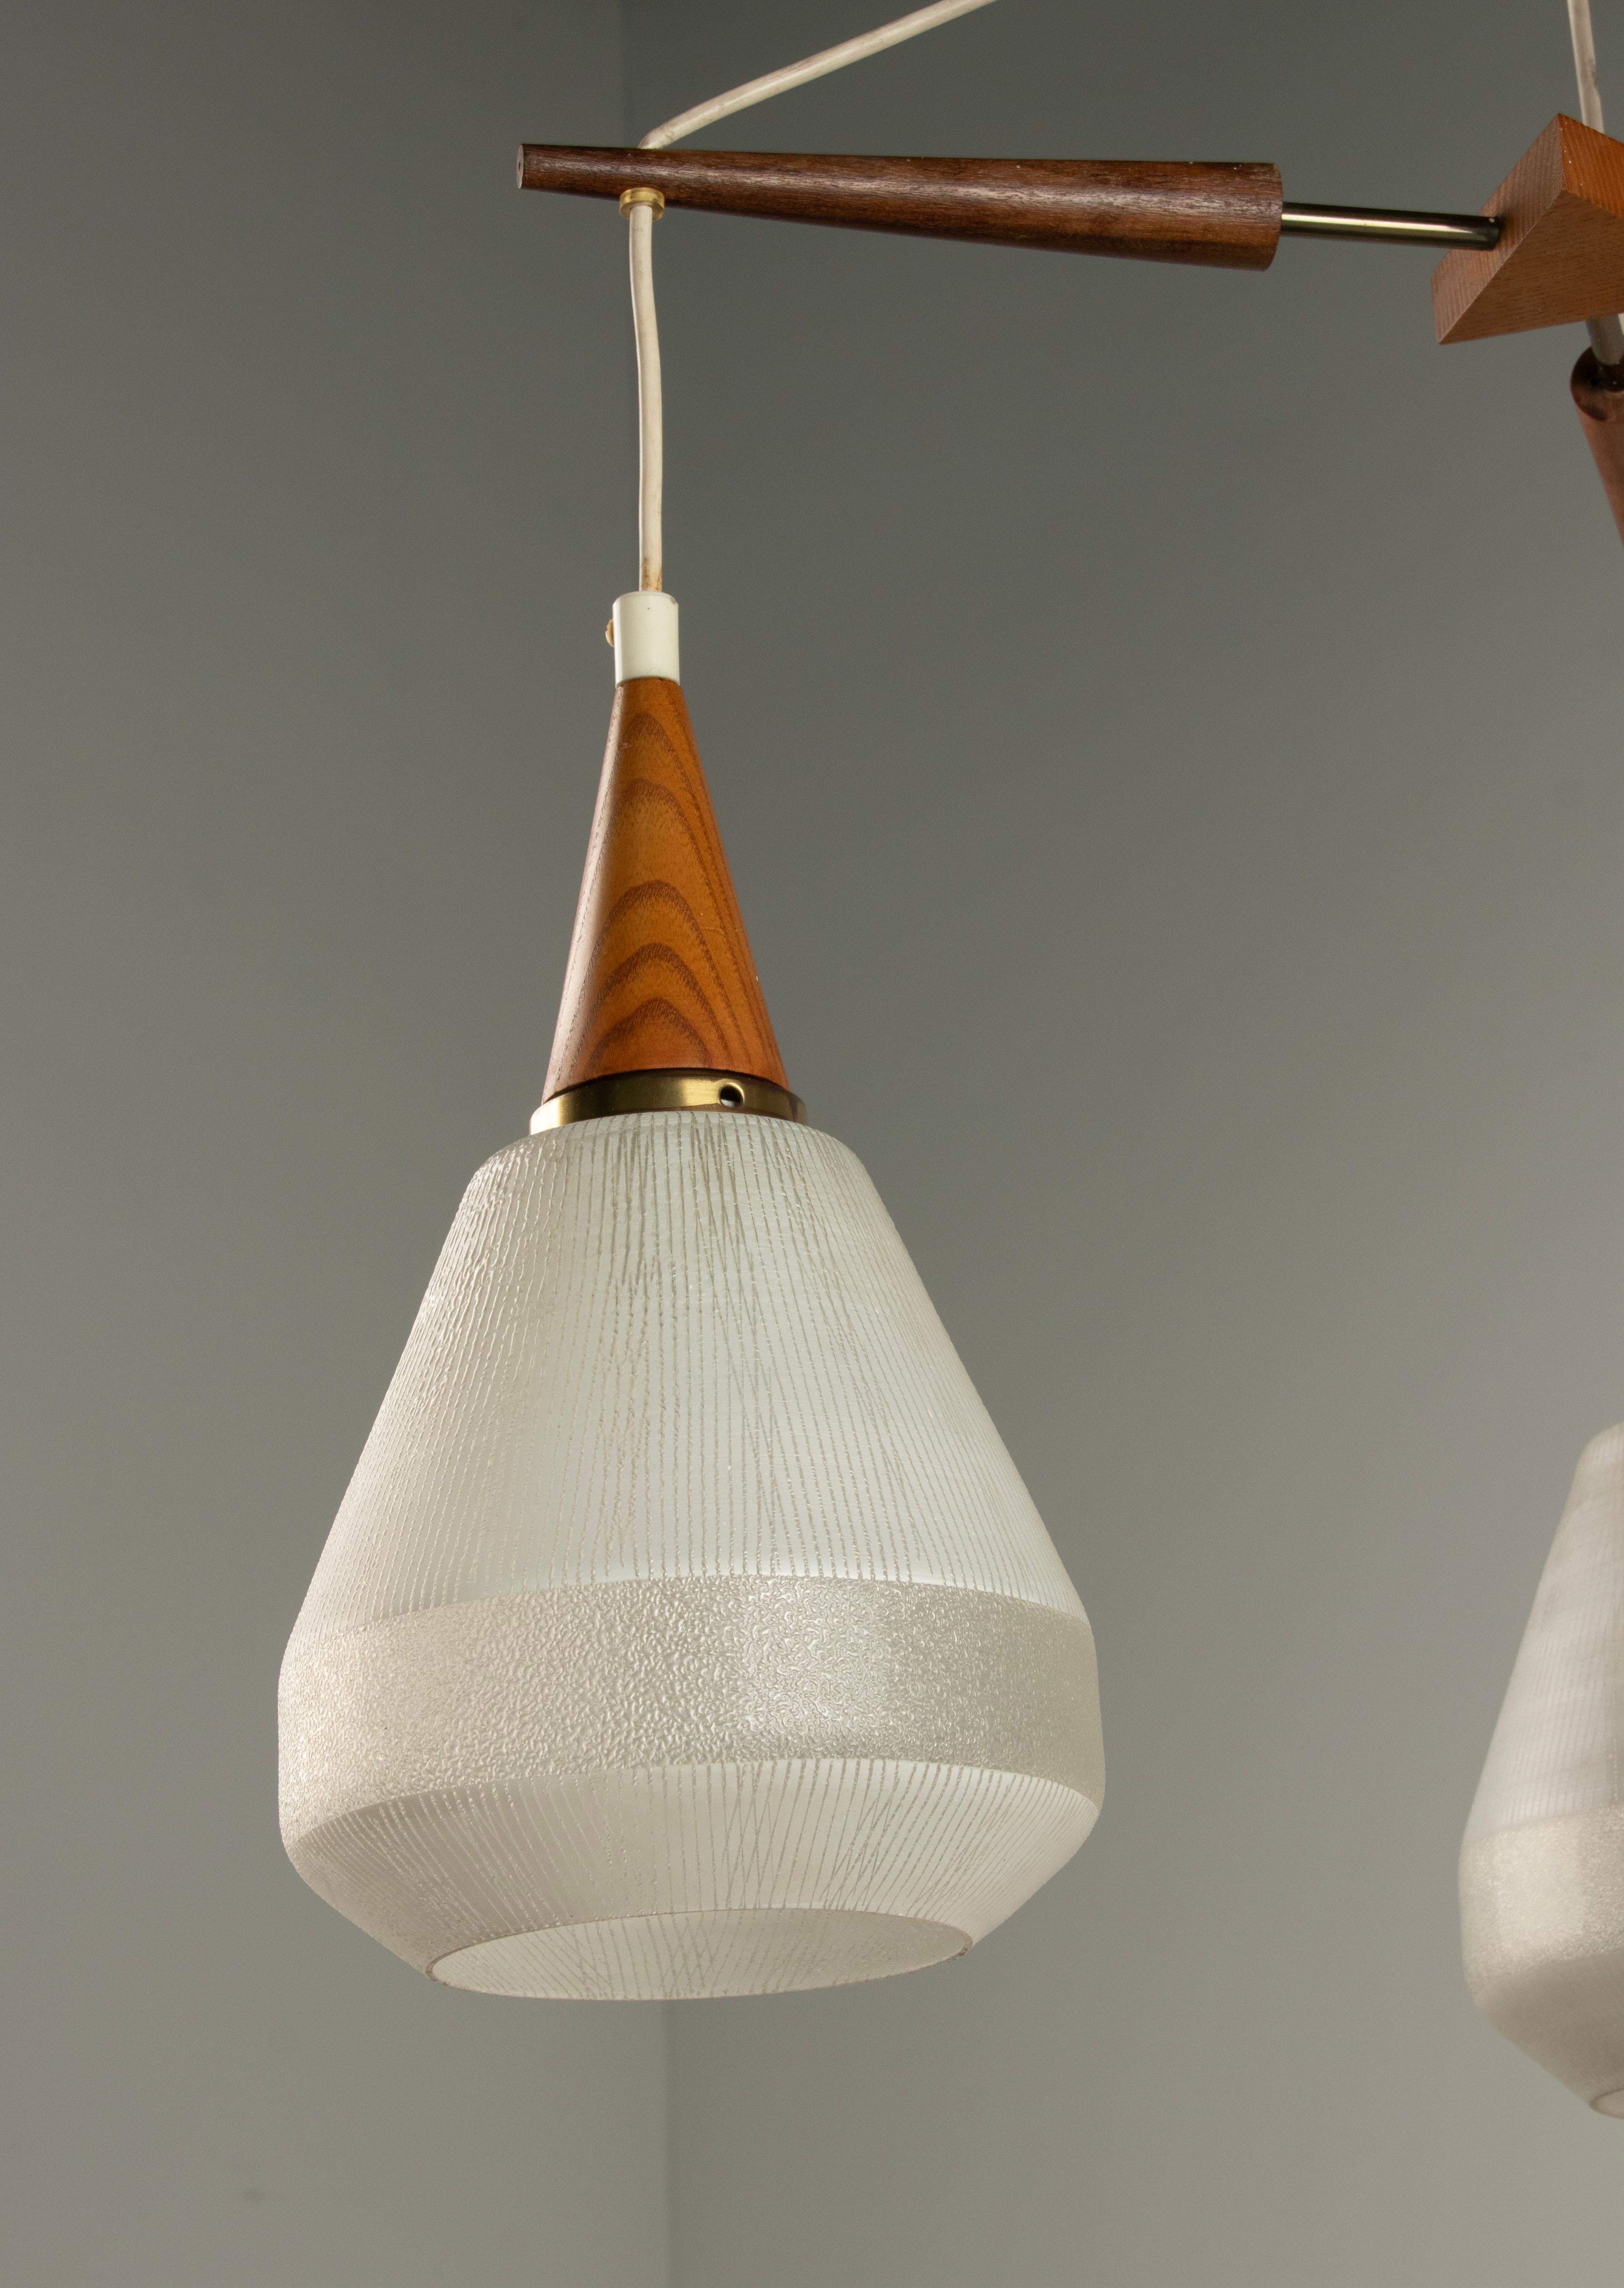 Mid 20th Century Danish Teakwood Pendant Lamp - Frosted Glass Shades For Sale 1